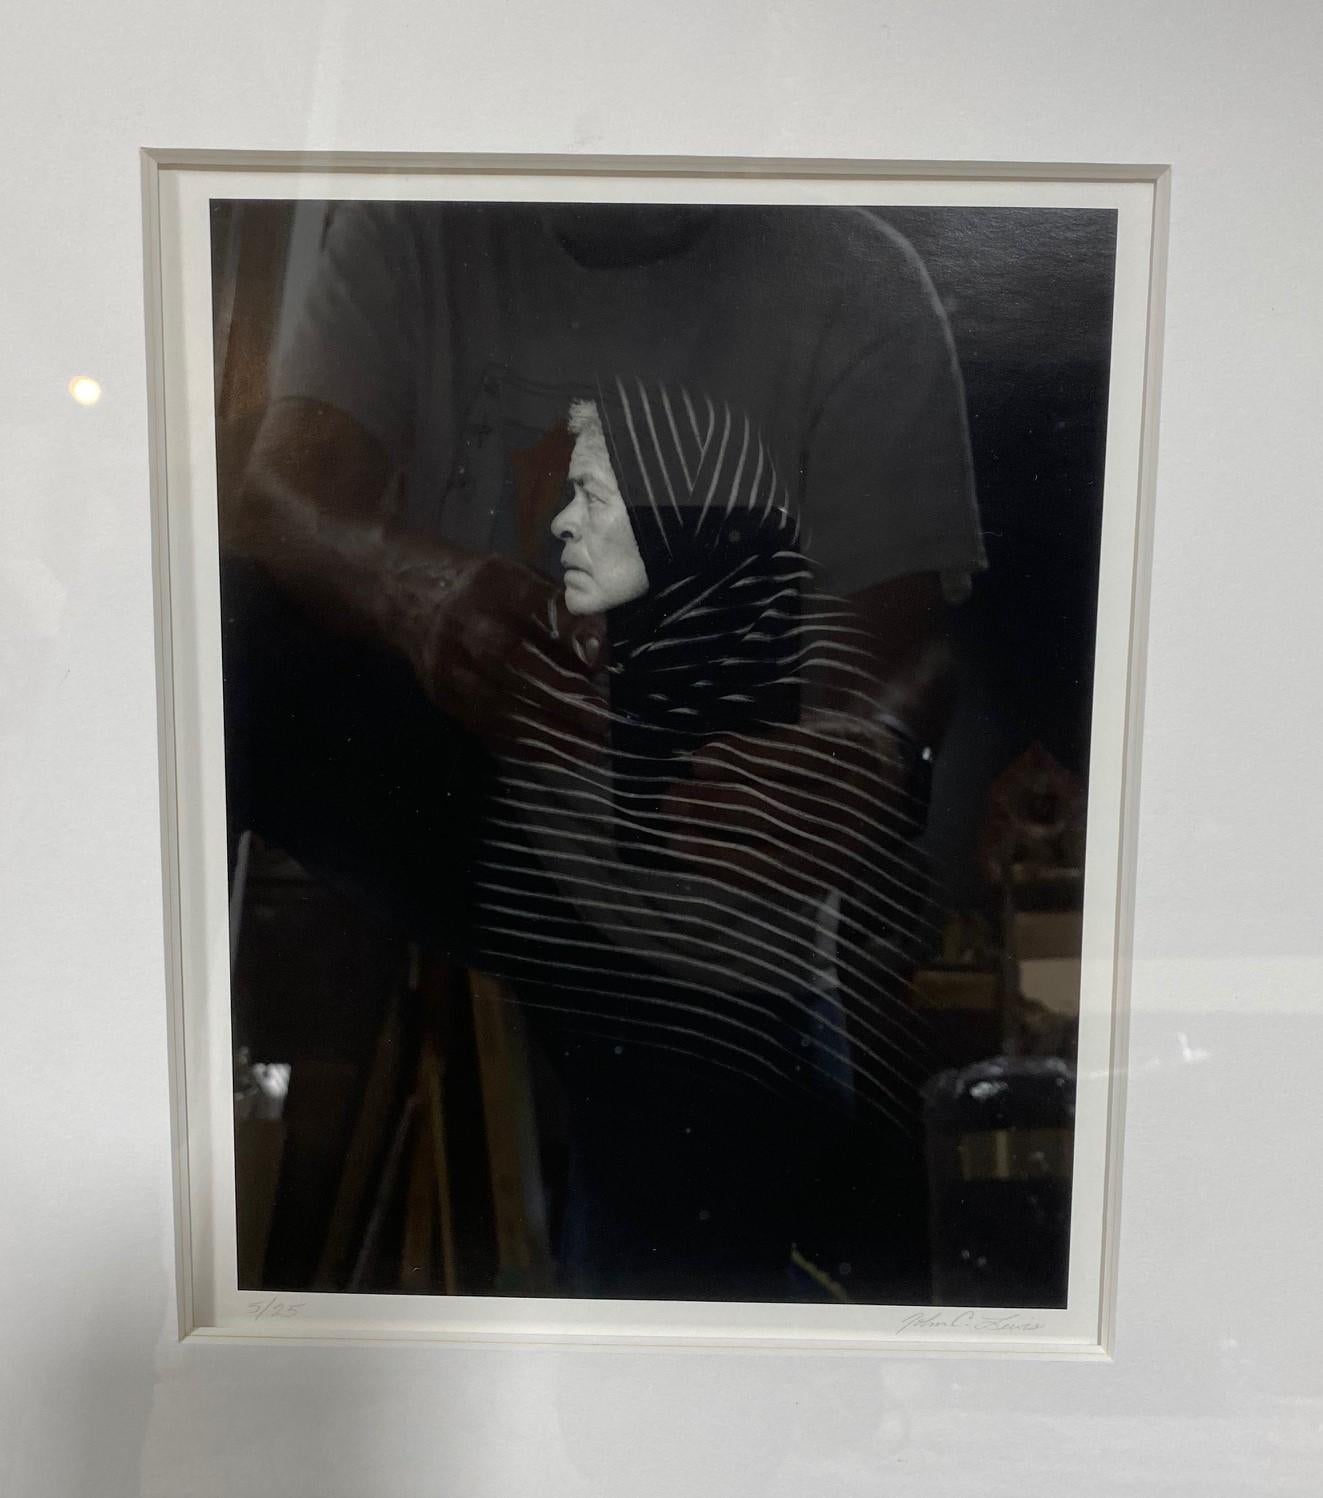 Modern John C Lewis Signed Limited Edition Silver Gelatin Photograph Print Mujer Divina For Sale